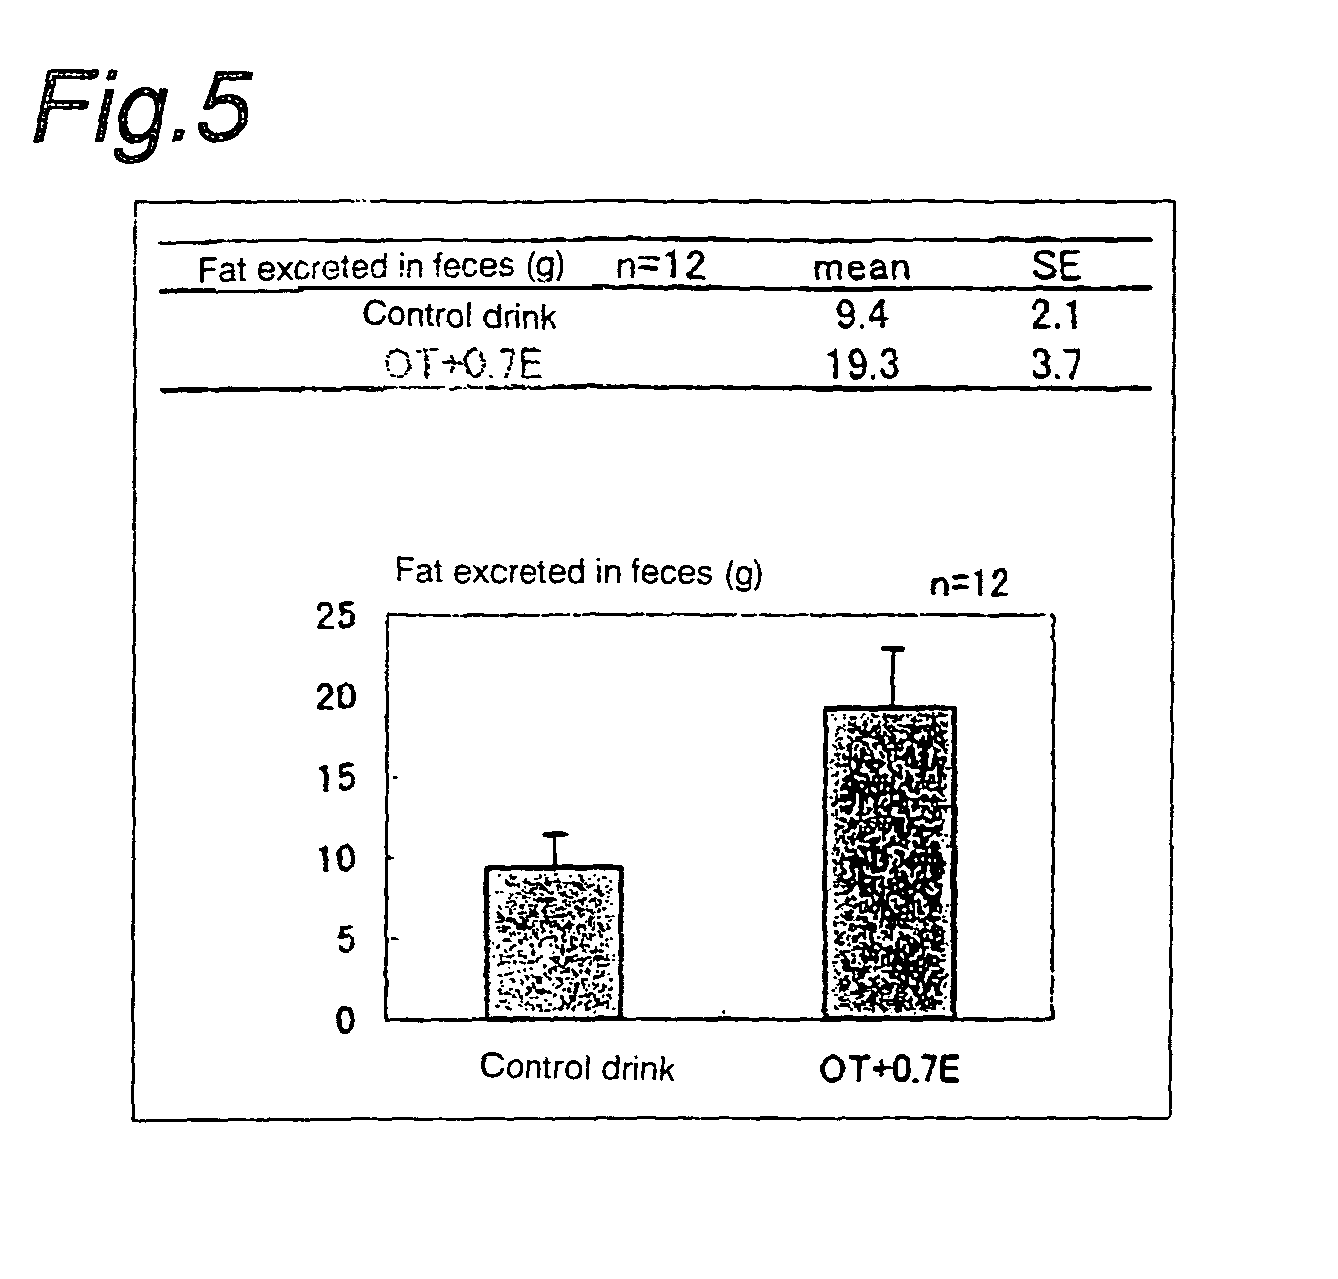 Lipase activity inhibitors containing high-molecular weight polyphenol fractions, tea extracts, and processes for producing the same